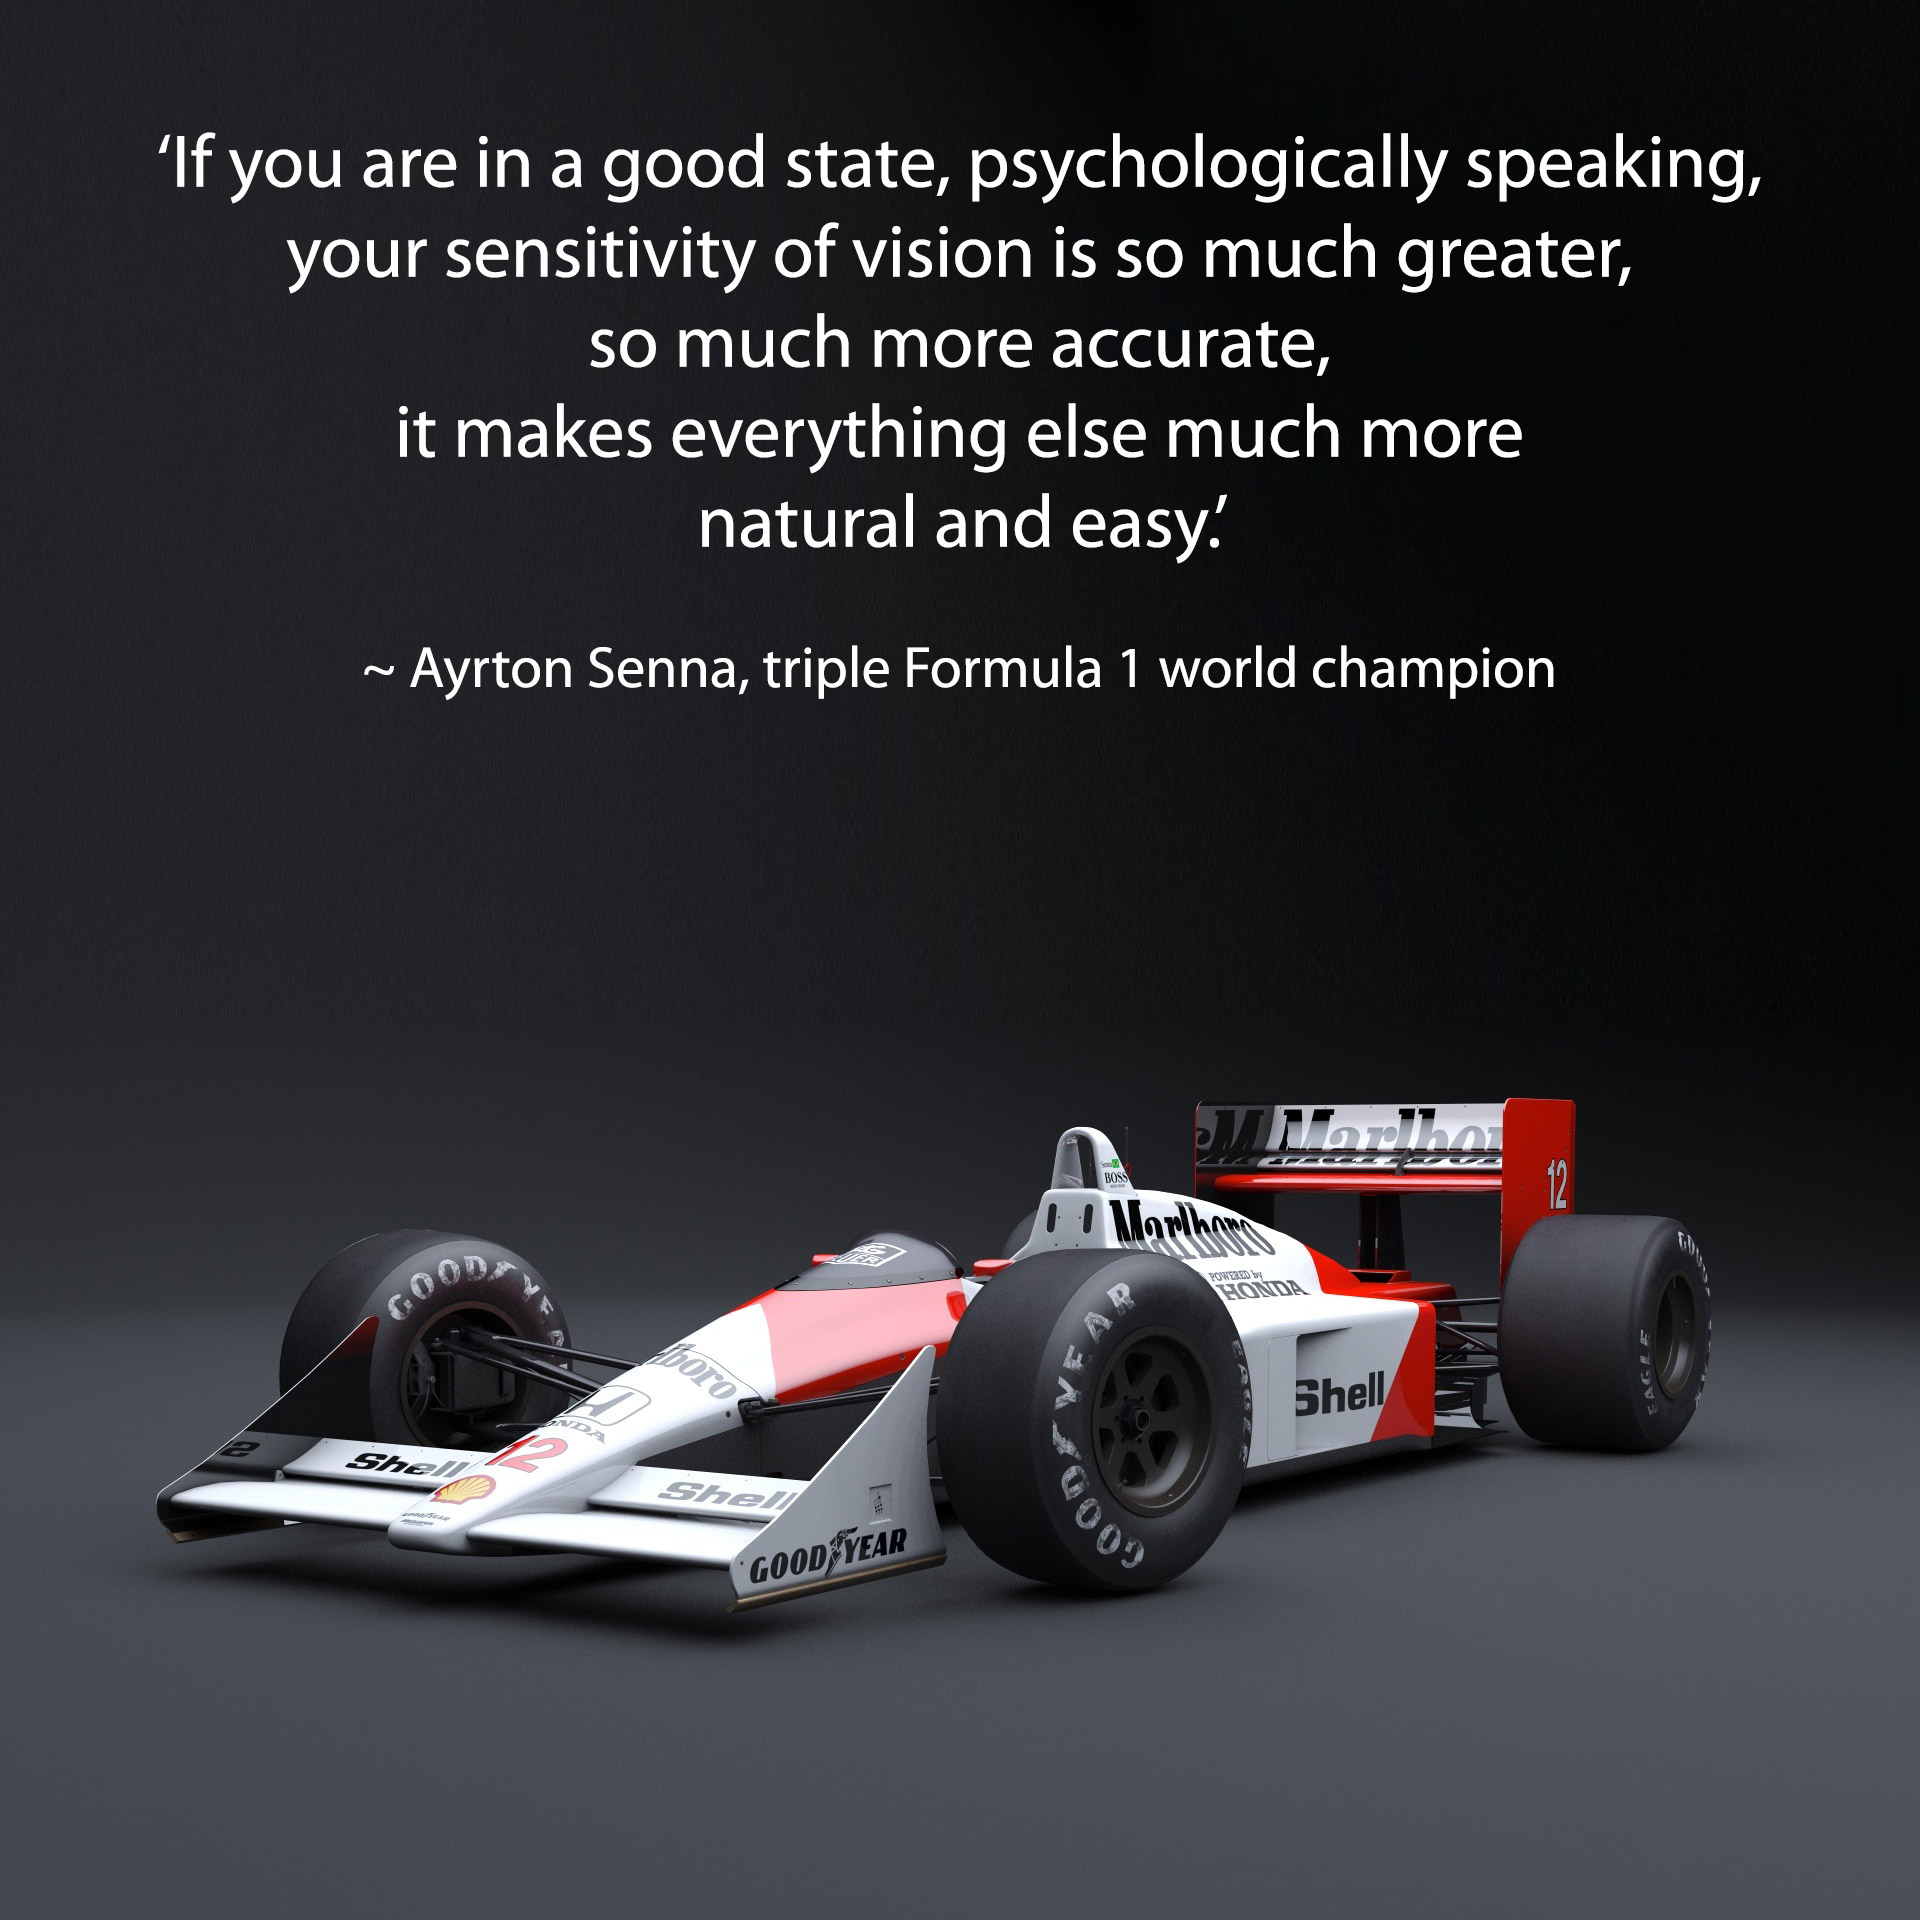 Ayrton Senna F1 car with a quote about how a good mental health helps driving natural and easy